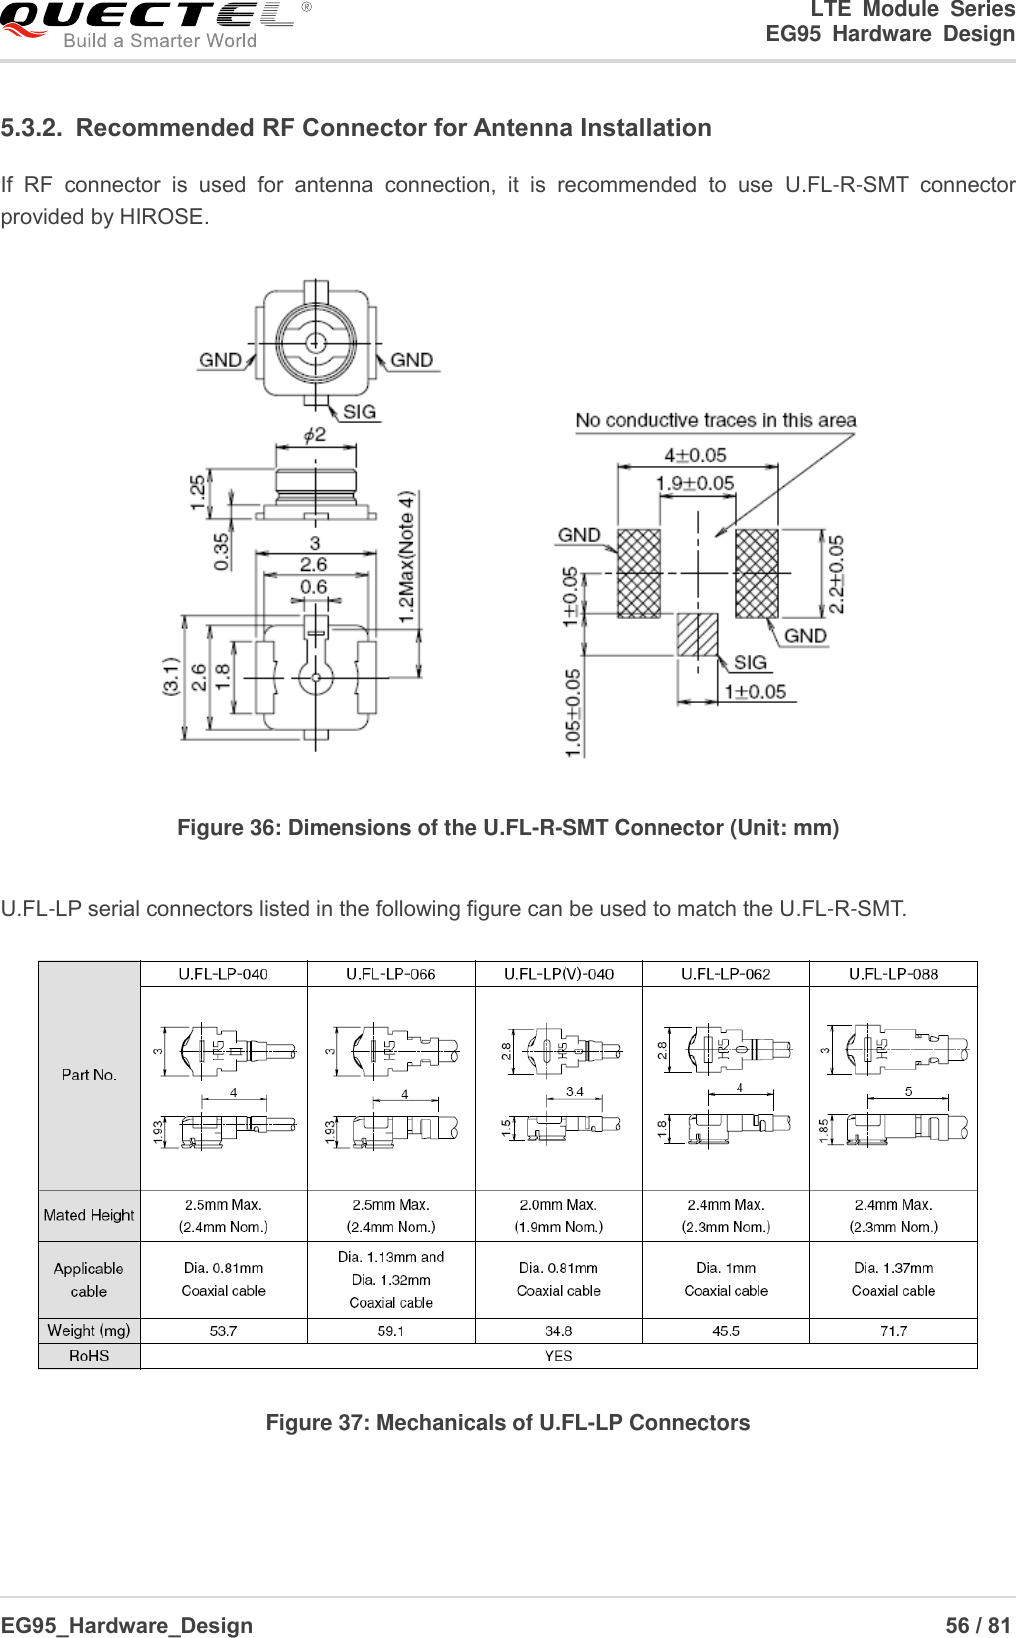 LTE  Module  Series                                                  EG95  Hardware  Design  EG95_Hardware_Design                                                                   56 / 81    5.3.2.  Recommended RF Connector for Antenna Installation   If  RF  connector  is  used  for  antenna  connection,  it  is  recommended  to  use  U.FL-R-SMT  connector provided by HIROSE.    Figure 36: Dimensions of the U.FL-R-SMT Connector (Unit: mm)  U.FL-LP serial connectors listed in the following figure can be used to match the U.FL-R-SMT.  Figure 37: Mechanicals of U.FL-LP Connectors    